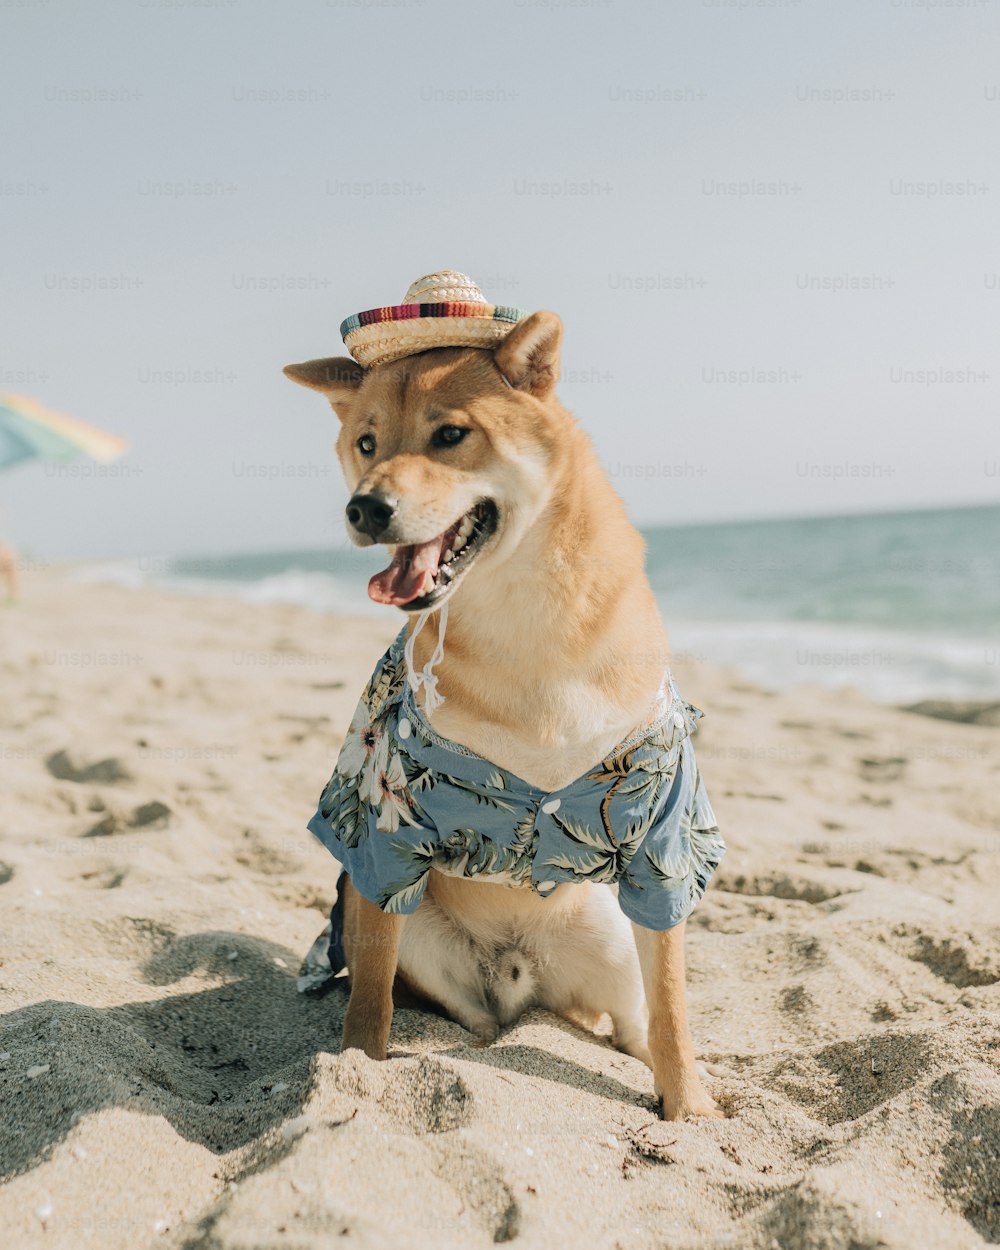 a dog wearing a shirt and hat on a beach